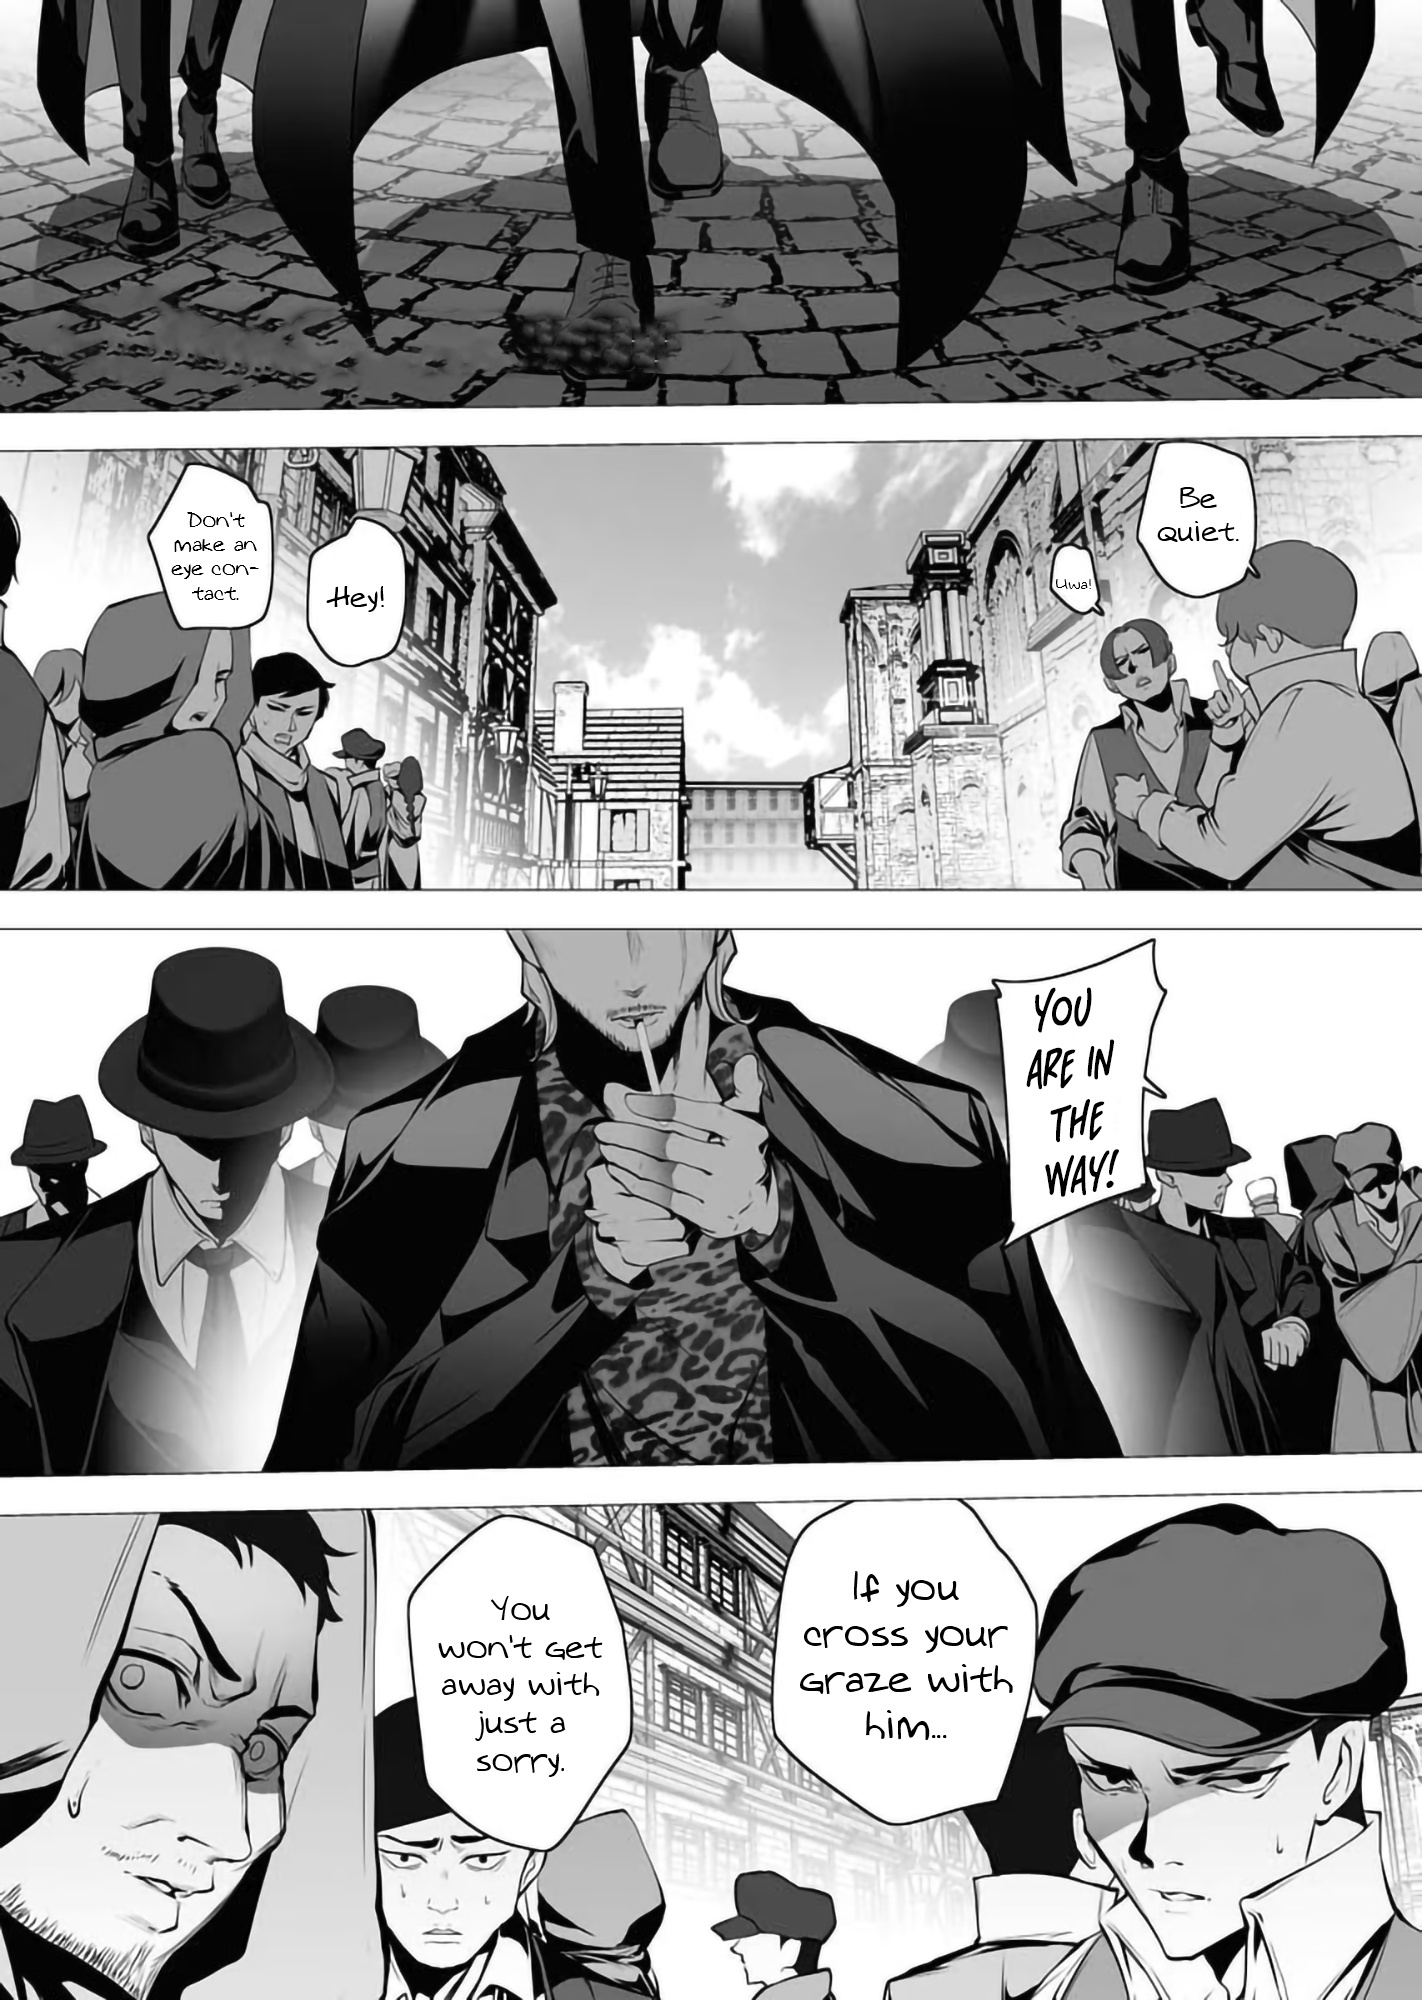 Serial Killer Isekai Ni Oritatsu Vol.1 Chapter 3: The Murderer And The Debt Collector - Picture 2